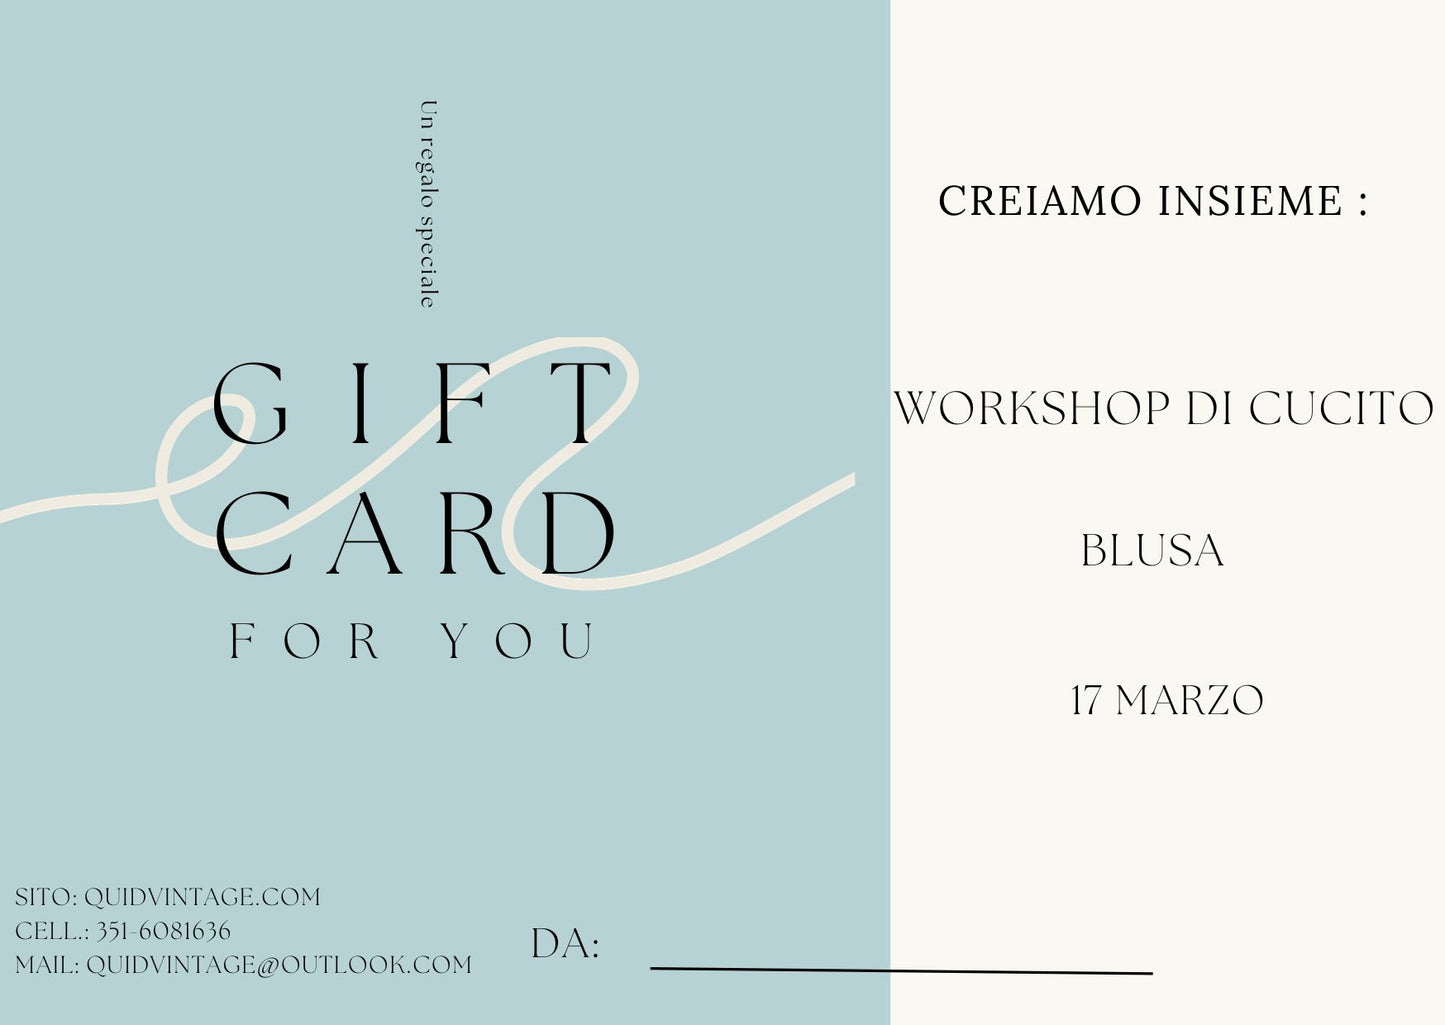 Gift card workshop cucito